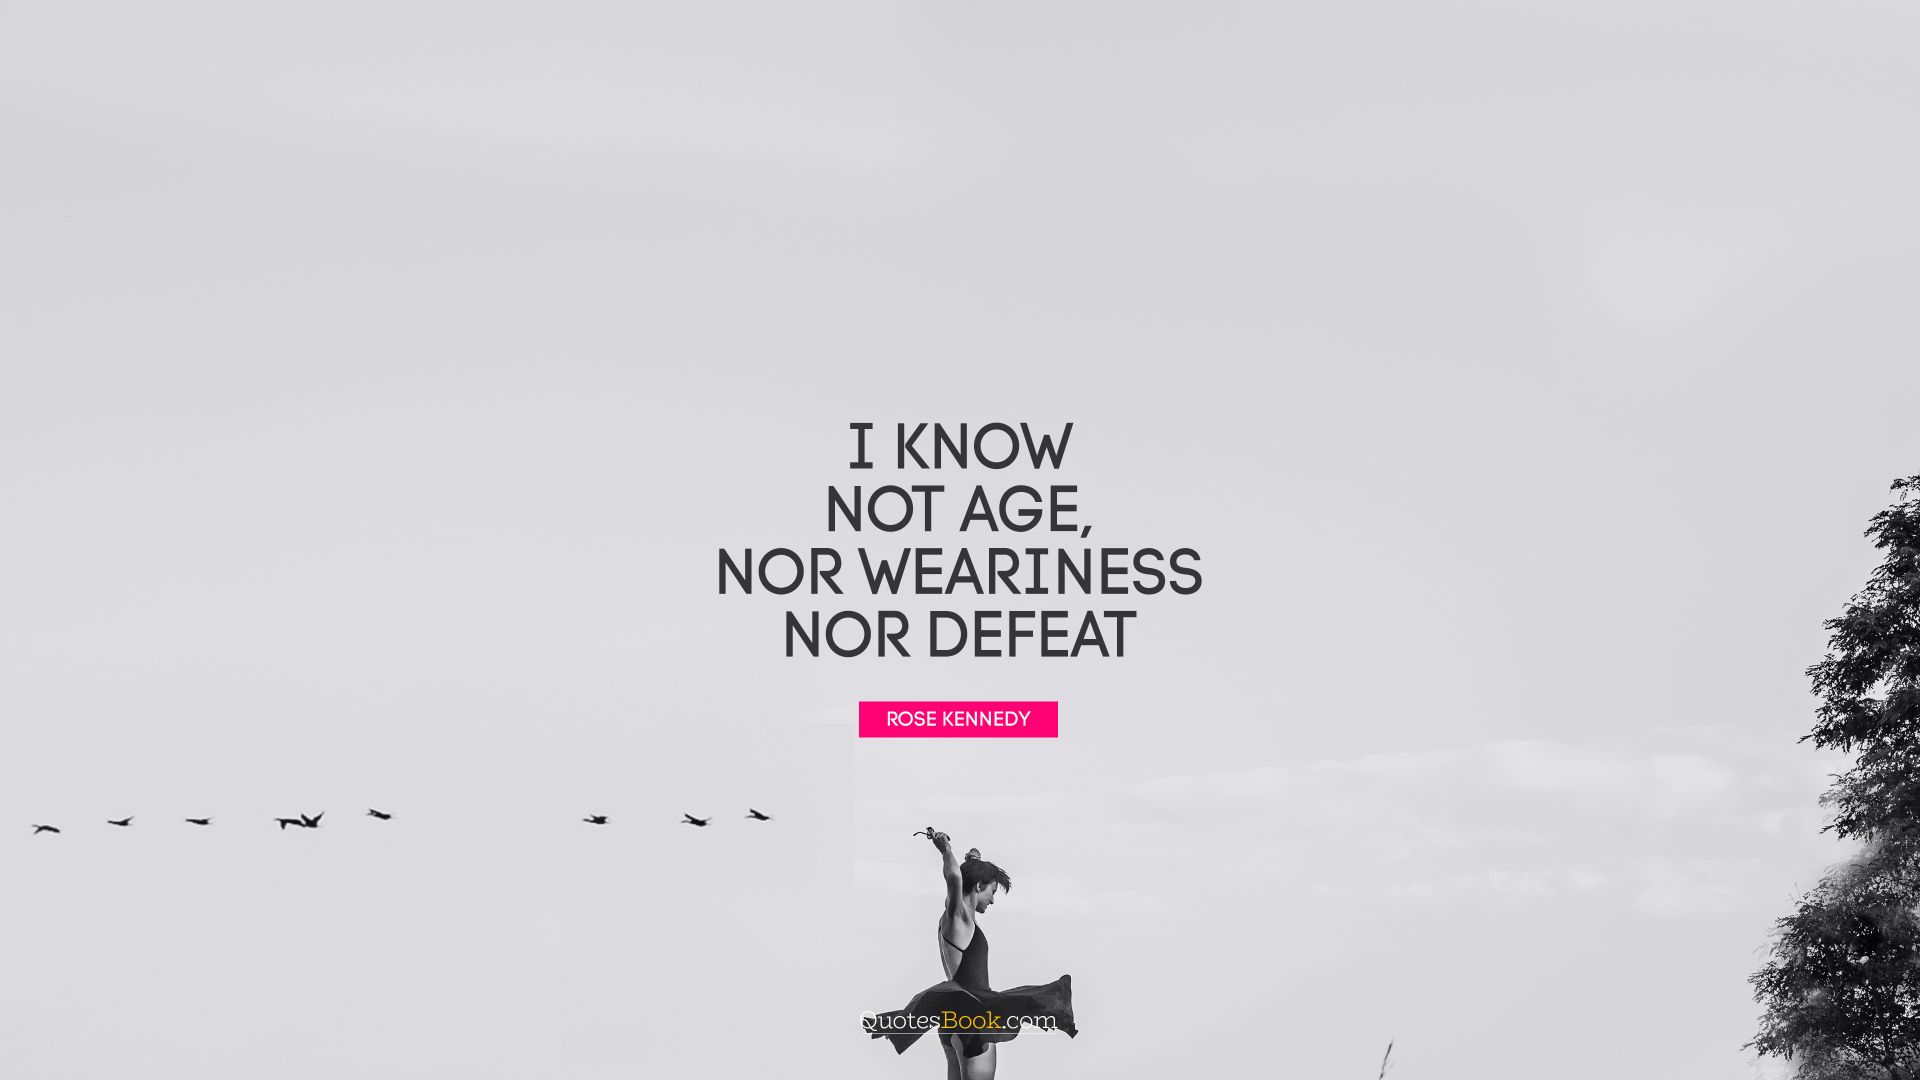 I know not age, nor weariness nor defeat. - Quote by Rose Kennedy